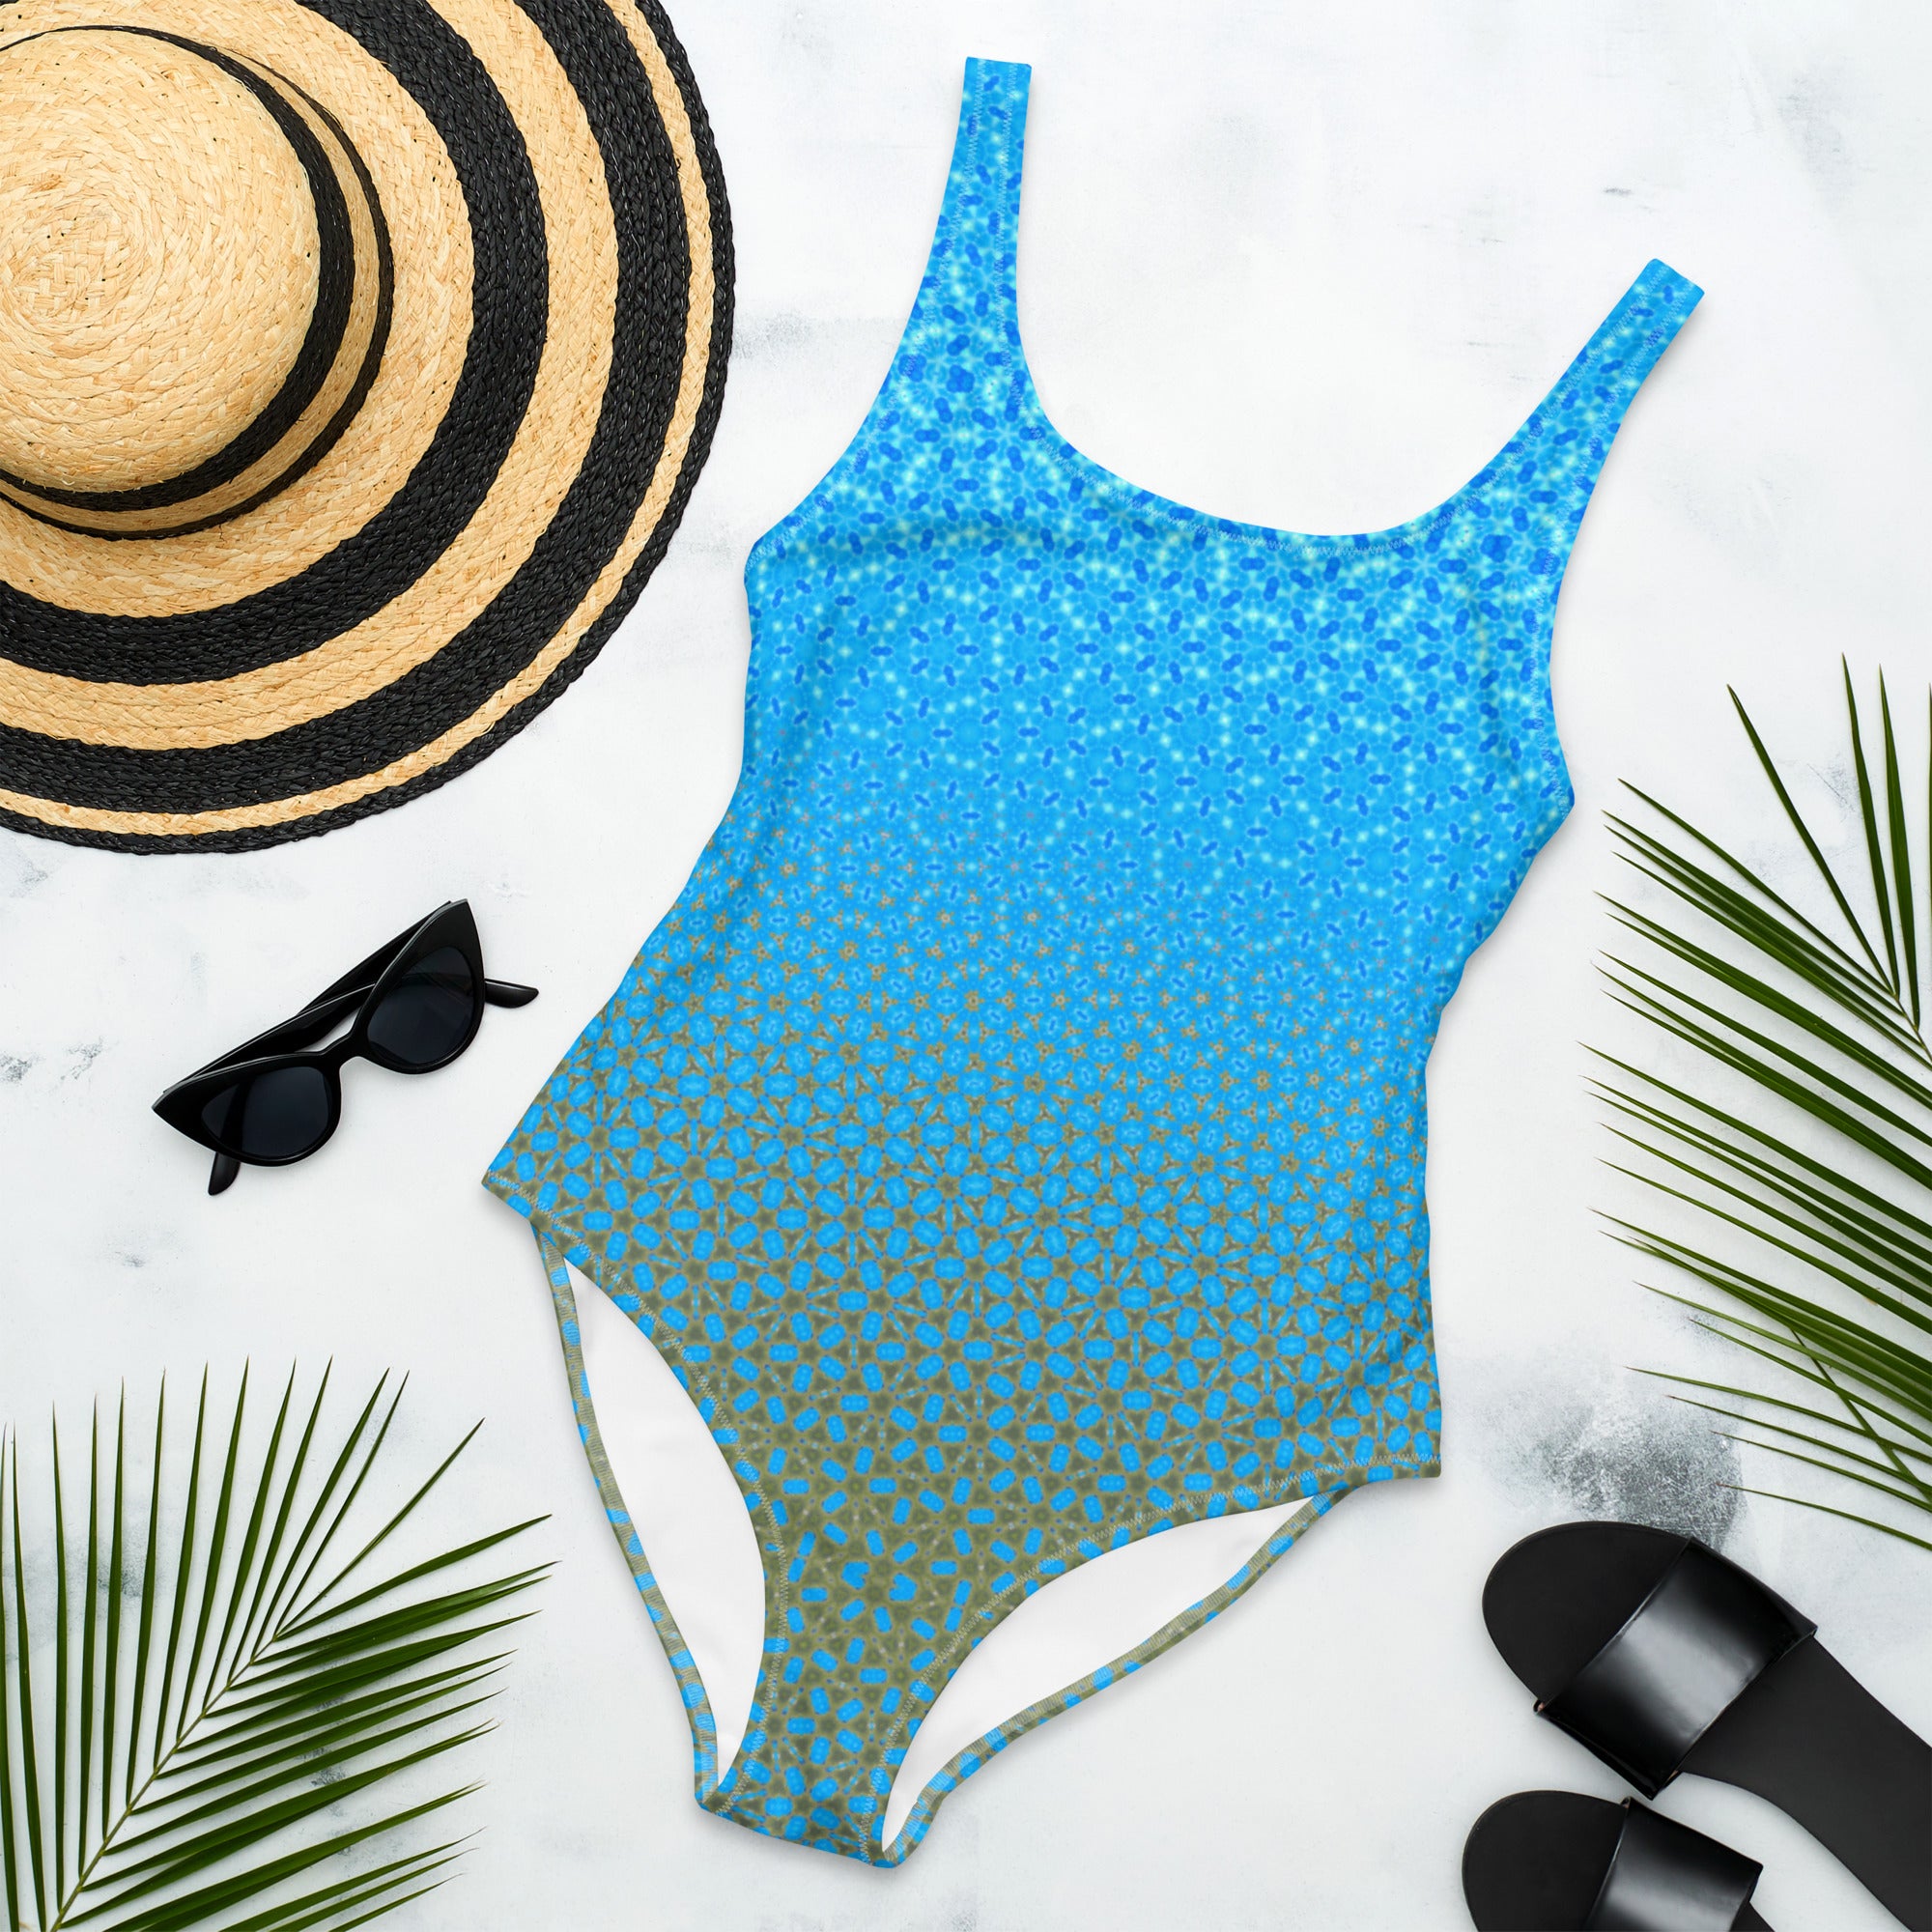 Blue Sky and Green field mixed pattern designed One-Piece Swimsuit, by Sensus Studio Design